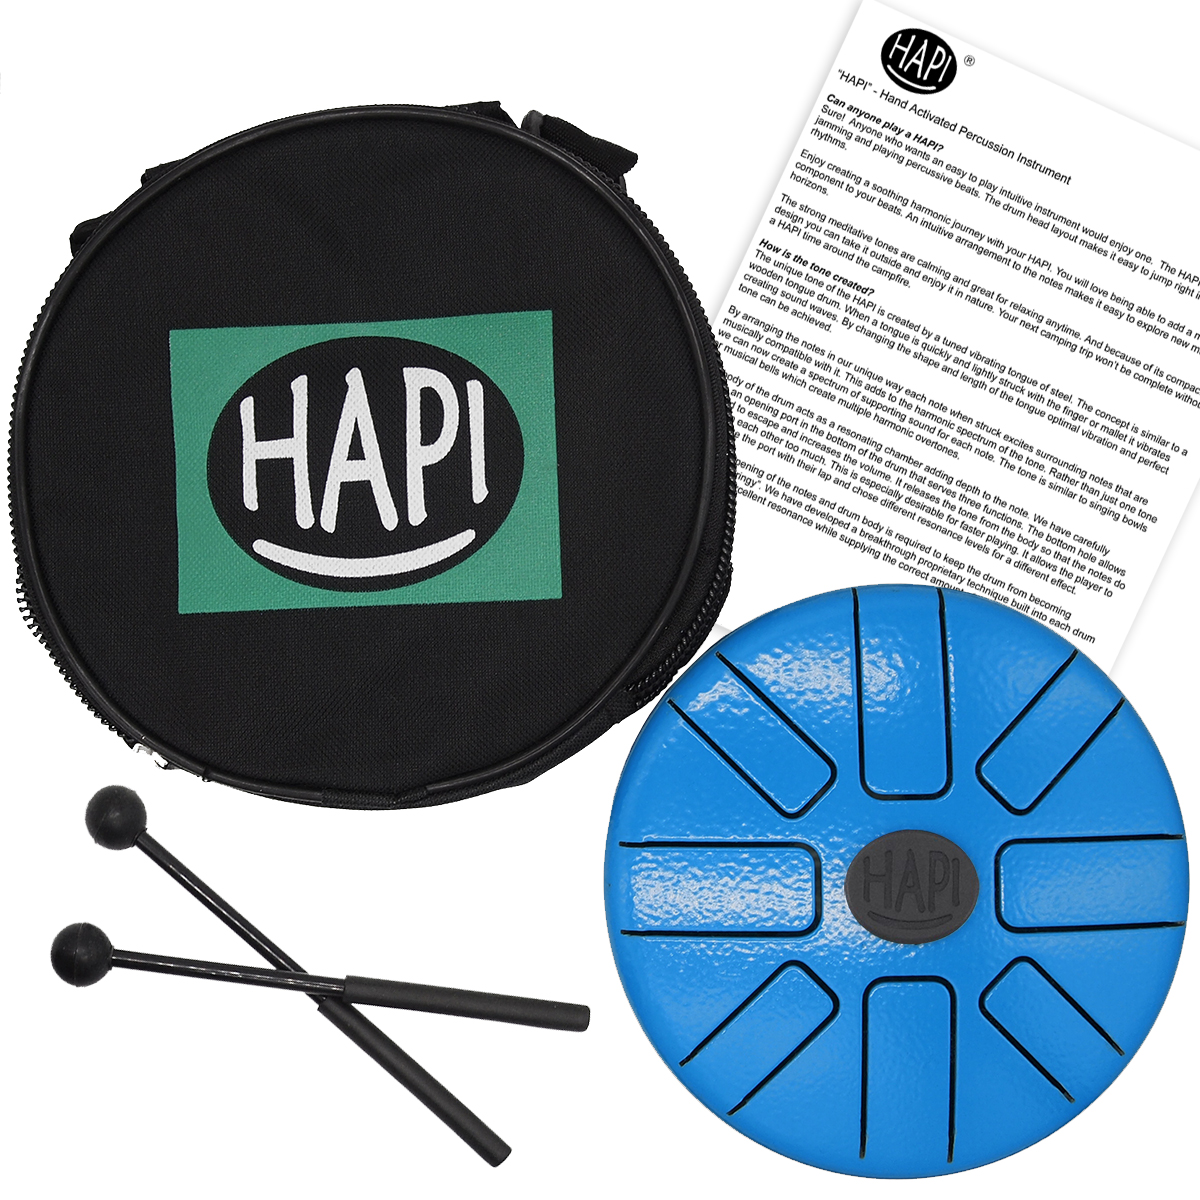 steel tongue drum HAPI Drum Percussion Play Along Tini Accessories